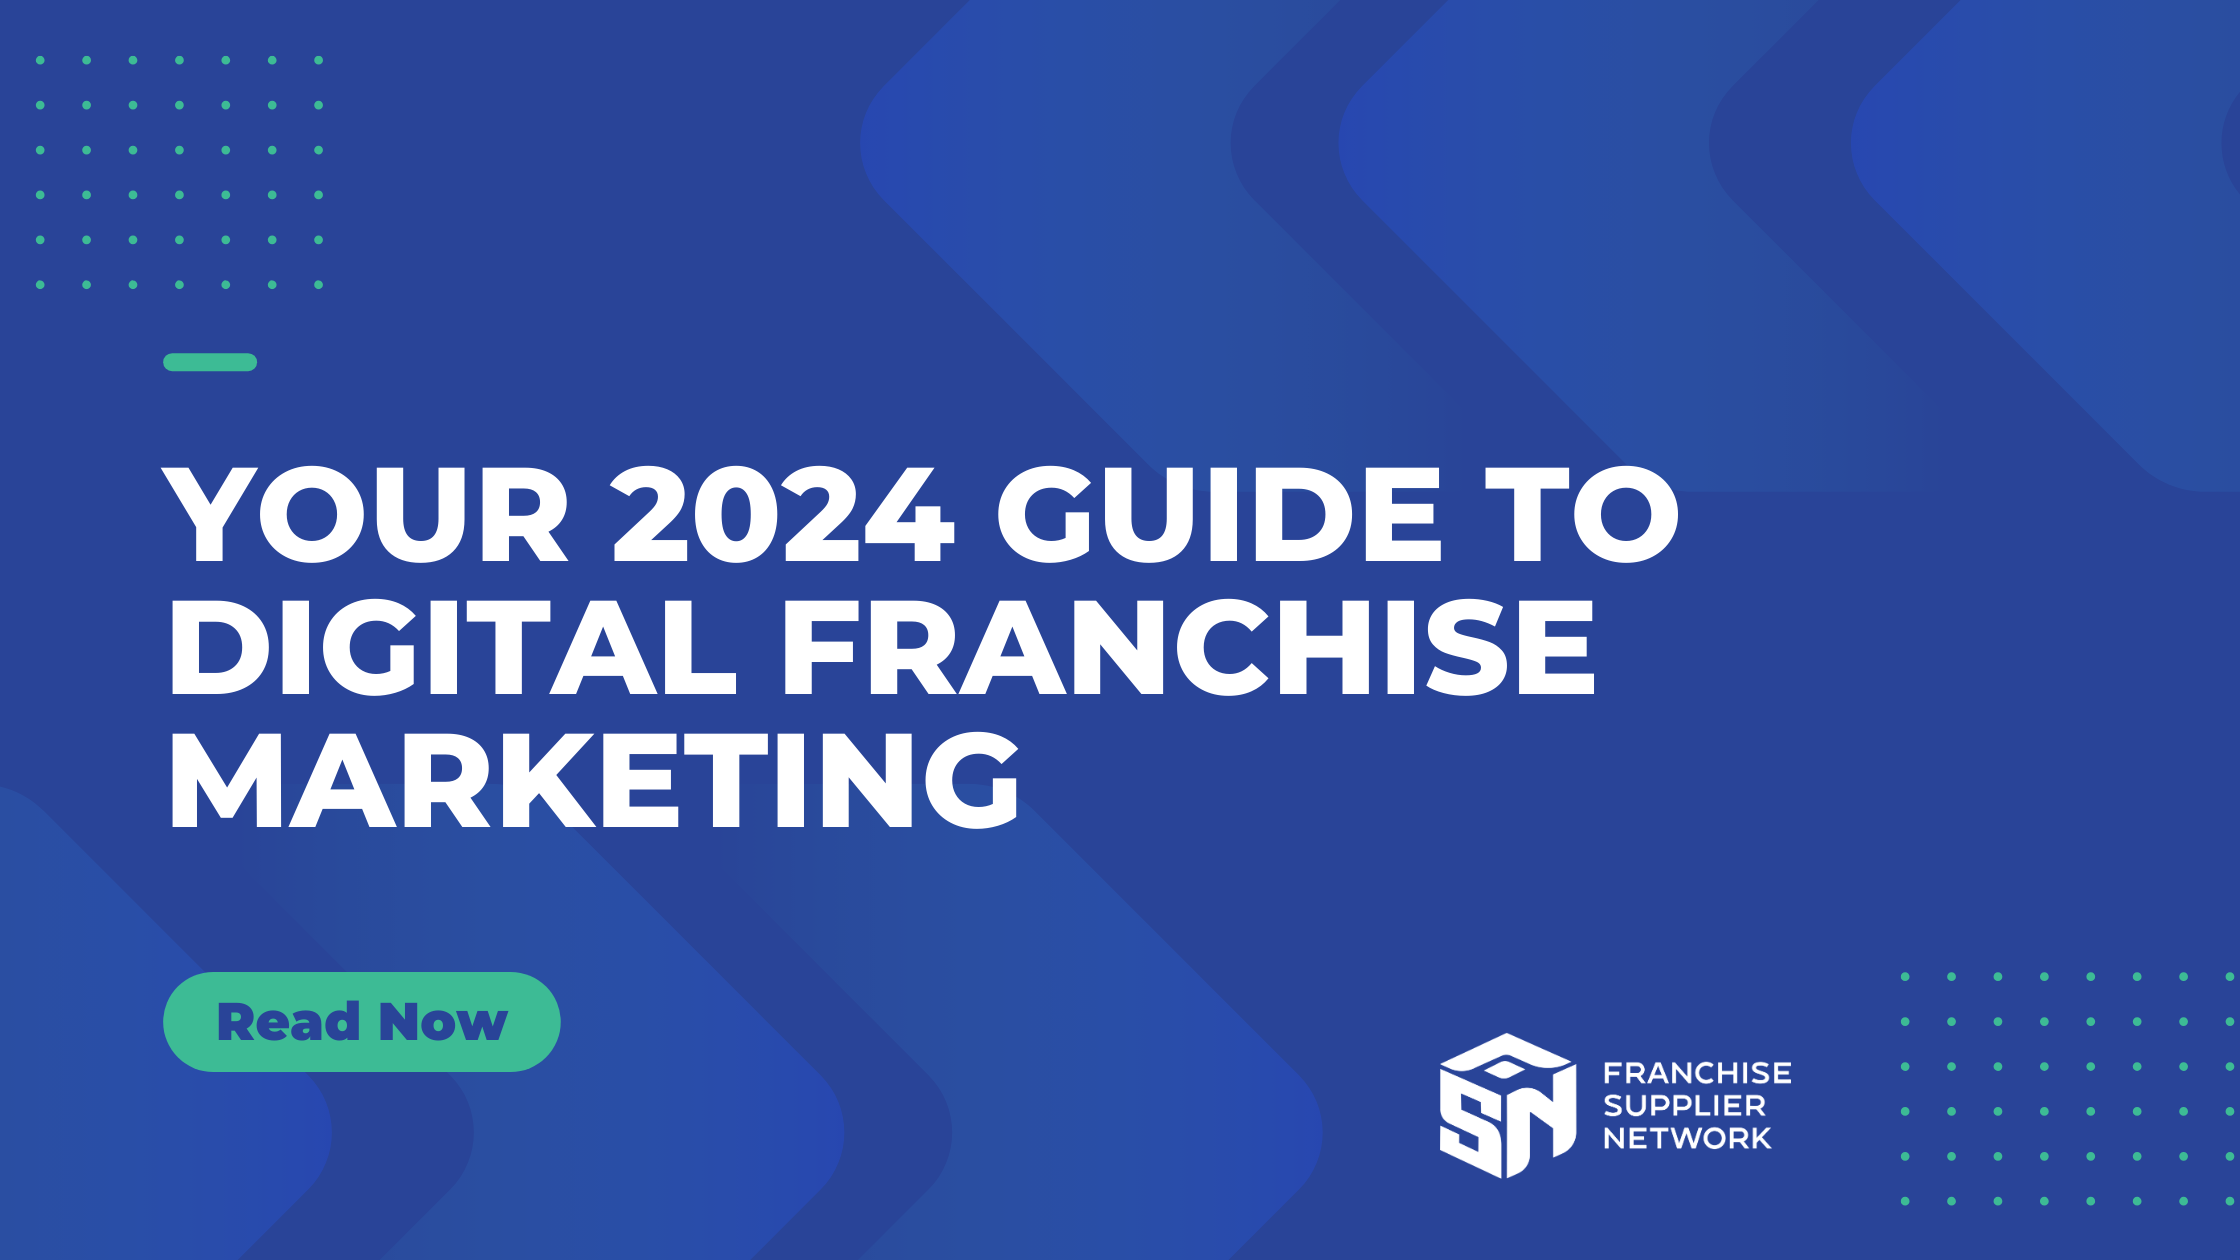 DevHub is in the business of helping franchise brands, and they put together a handy 2024 guide to digital franchise marketing.